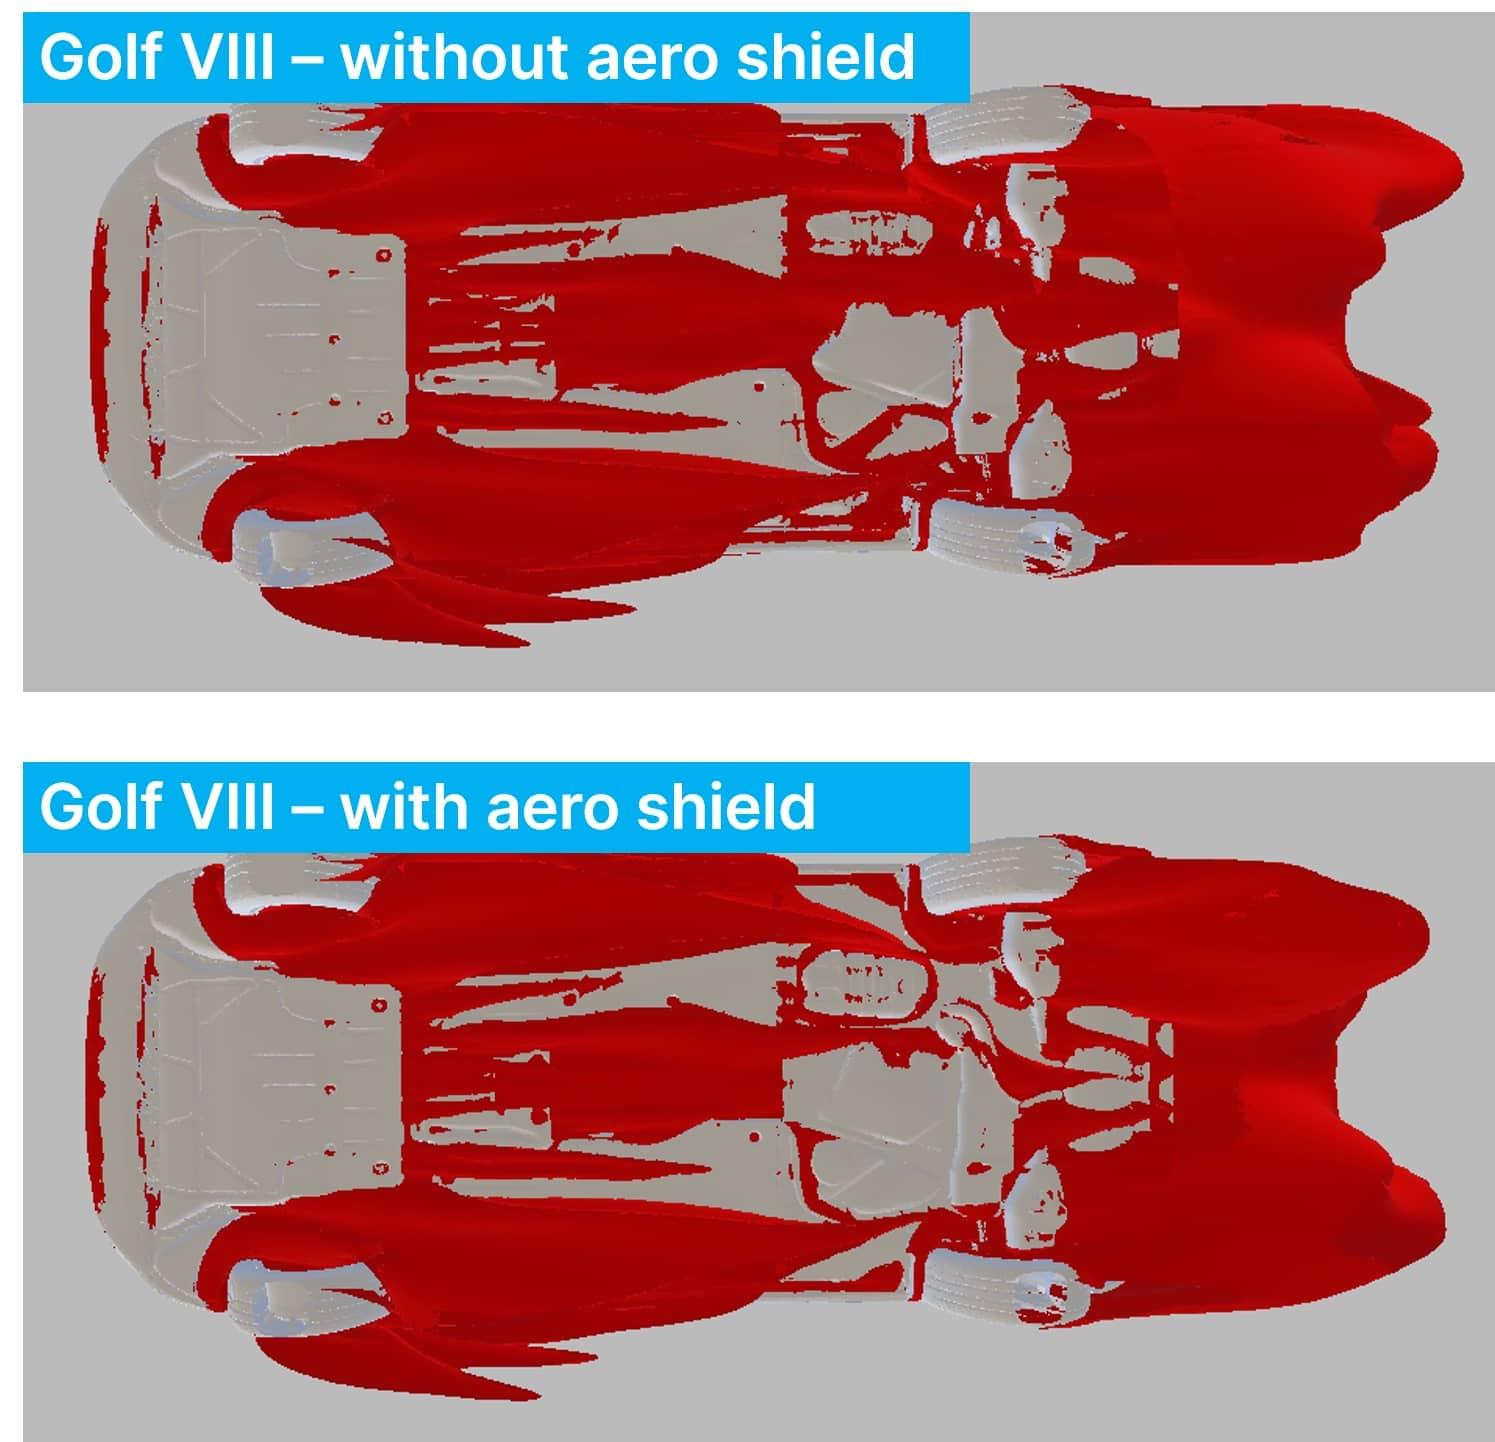 Underfloor aerodynamics of the Golf VIII - without and with A2MAC1 aero shield